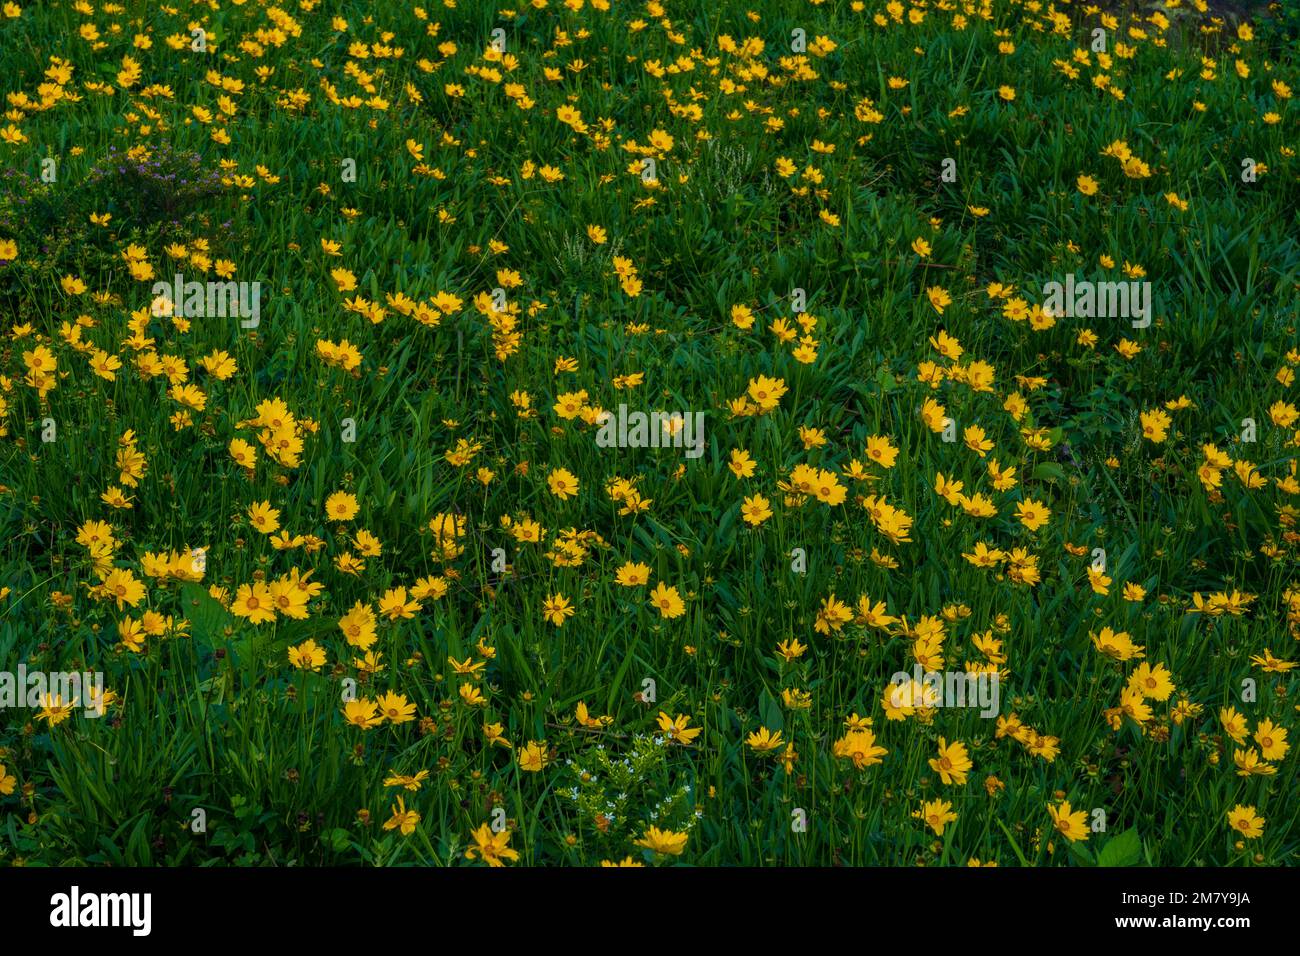 Field of Coreopsis lanceolata yellow flowers in the garden. Stock Photo